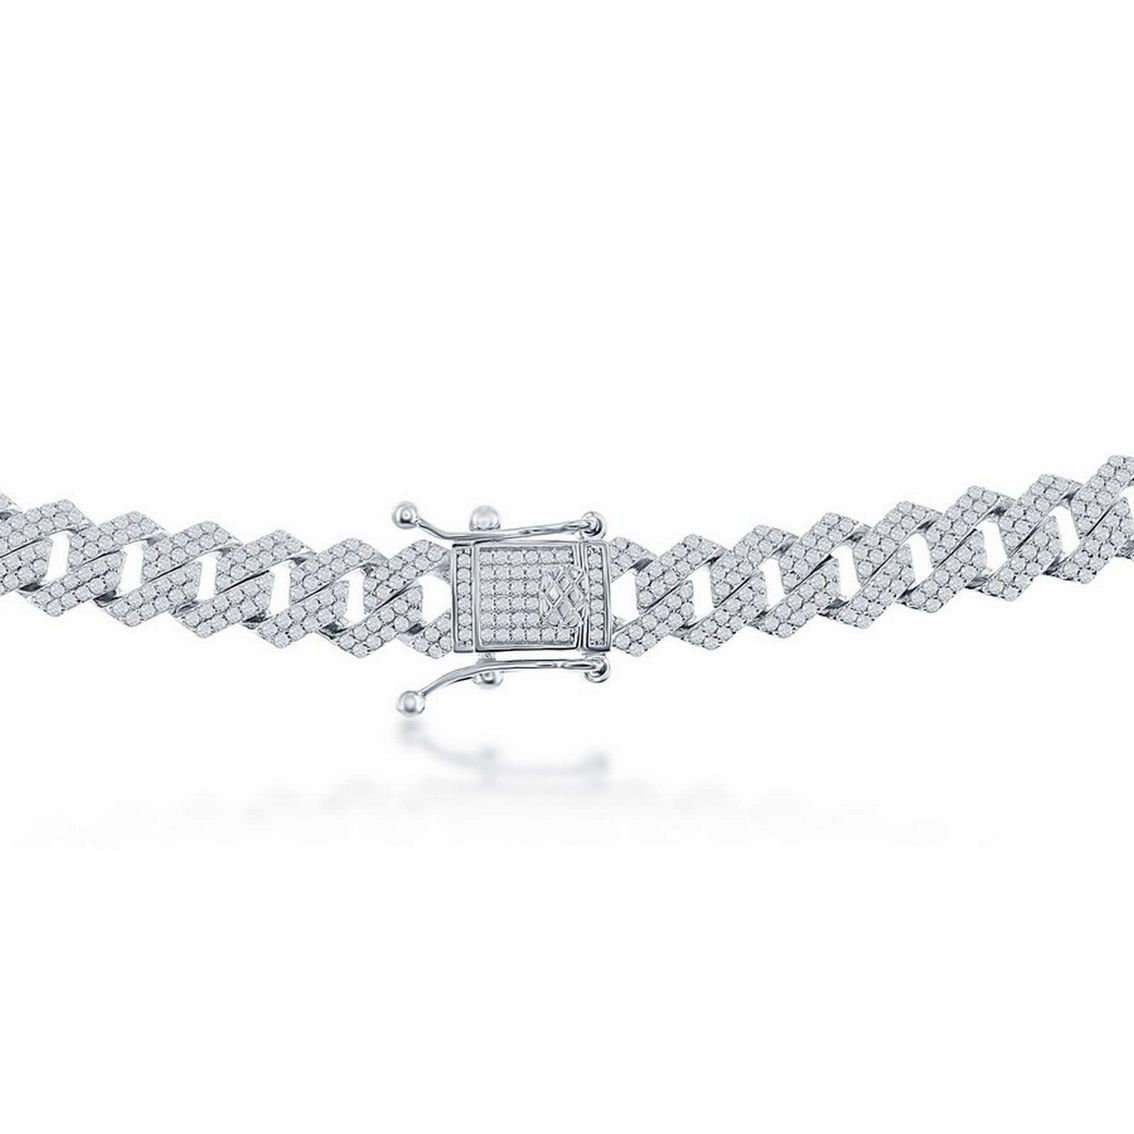 Links of Italy Sterling Silver 9mm Micro Pave Monaco Chain - Image 2 of 4